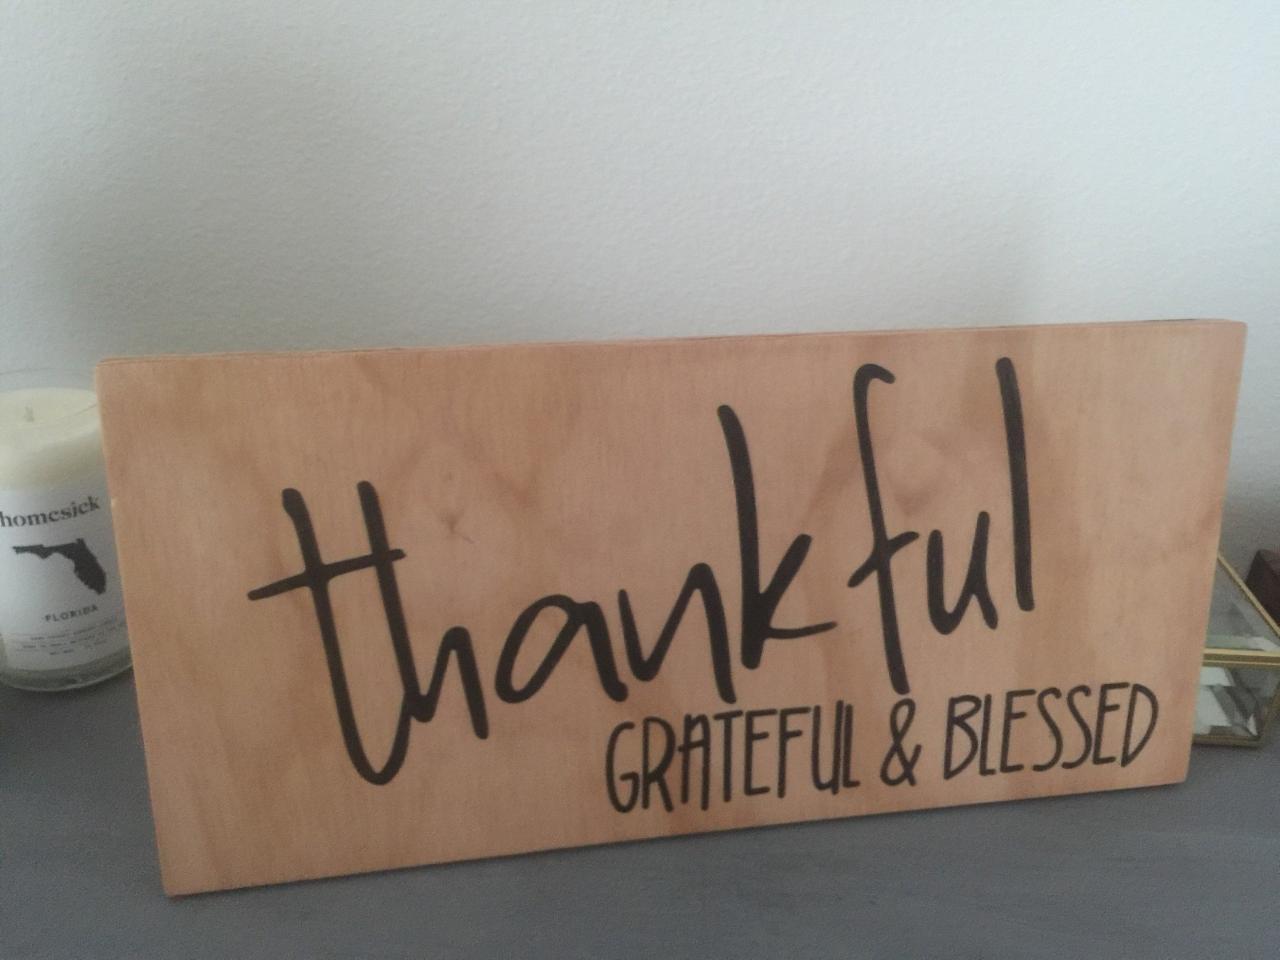 Thankful grateful & blessed 8x15 hand painted wood sign. Shelf sitter. Fall home decor.